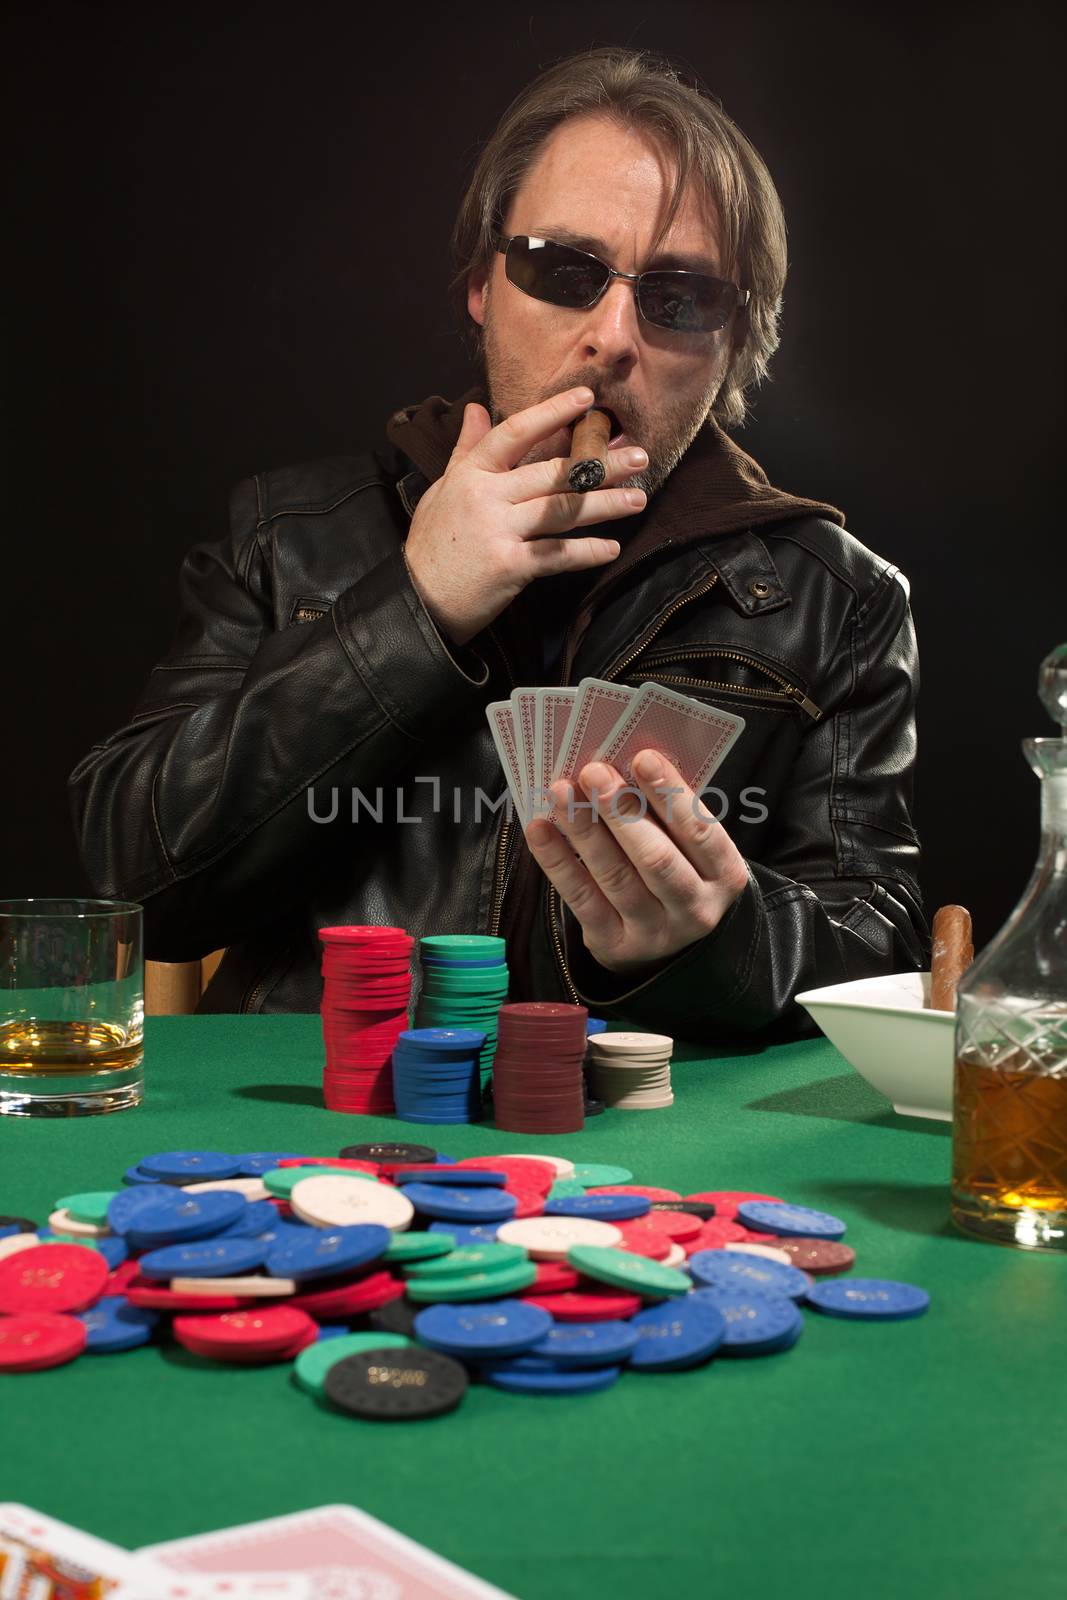 Photo of a man playing poker while wearing sunglasses and smoking a cigar.
